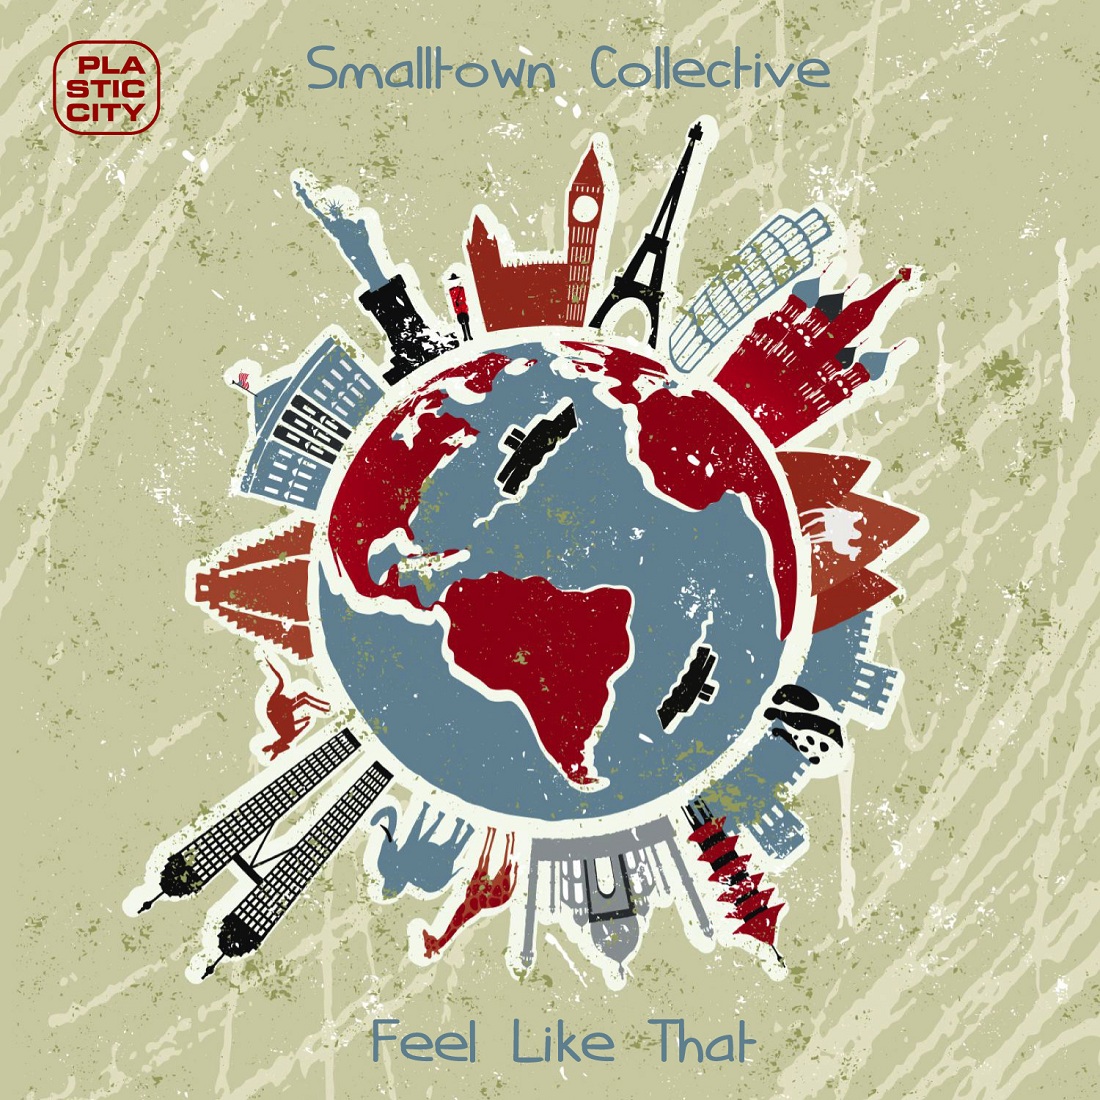 Smalltown Collective - Feel Like That [PLAY01248]